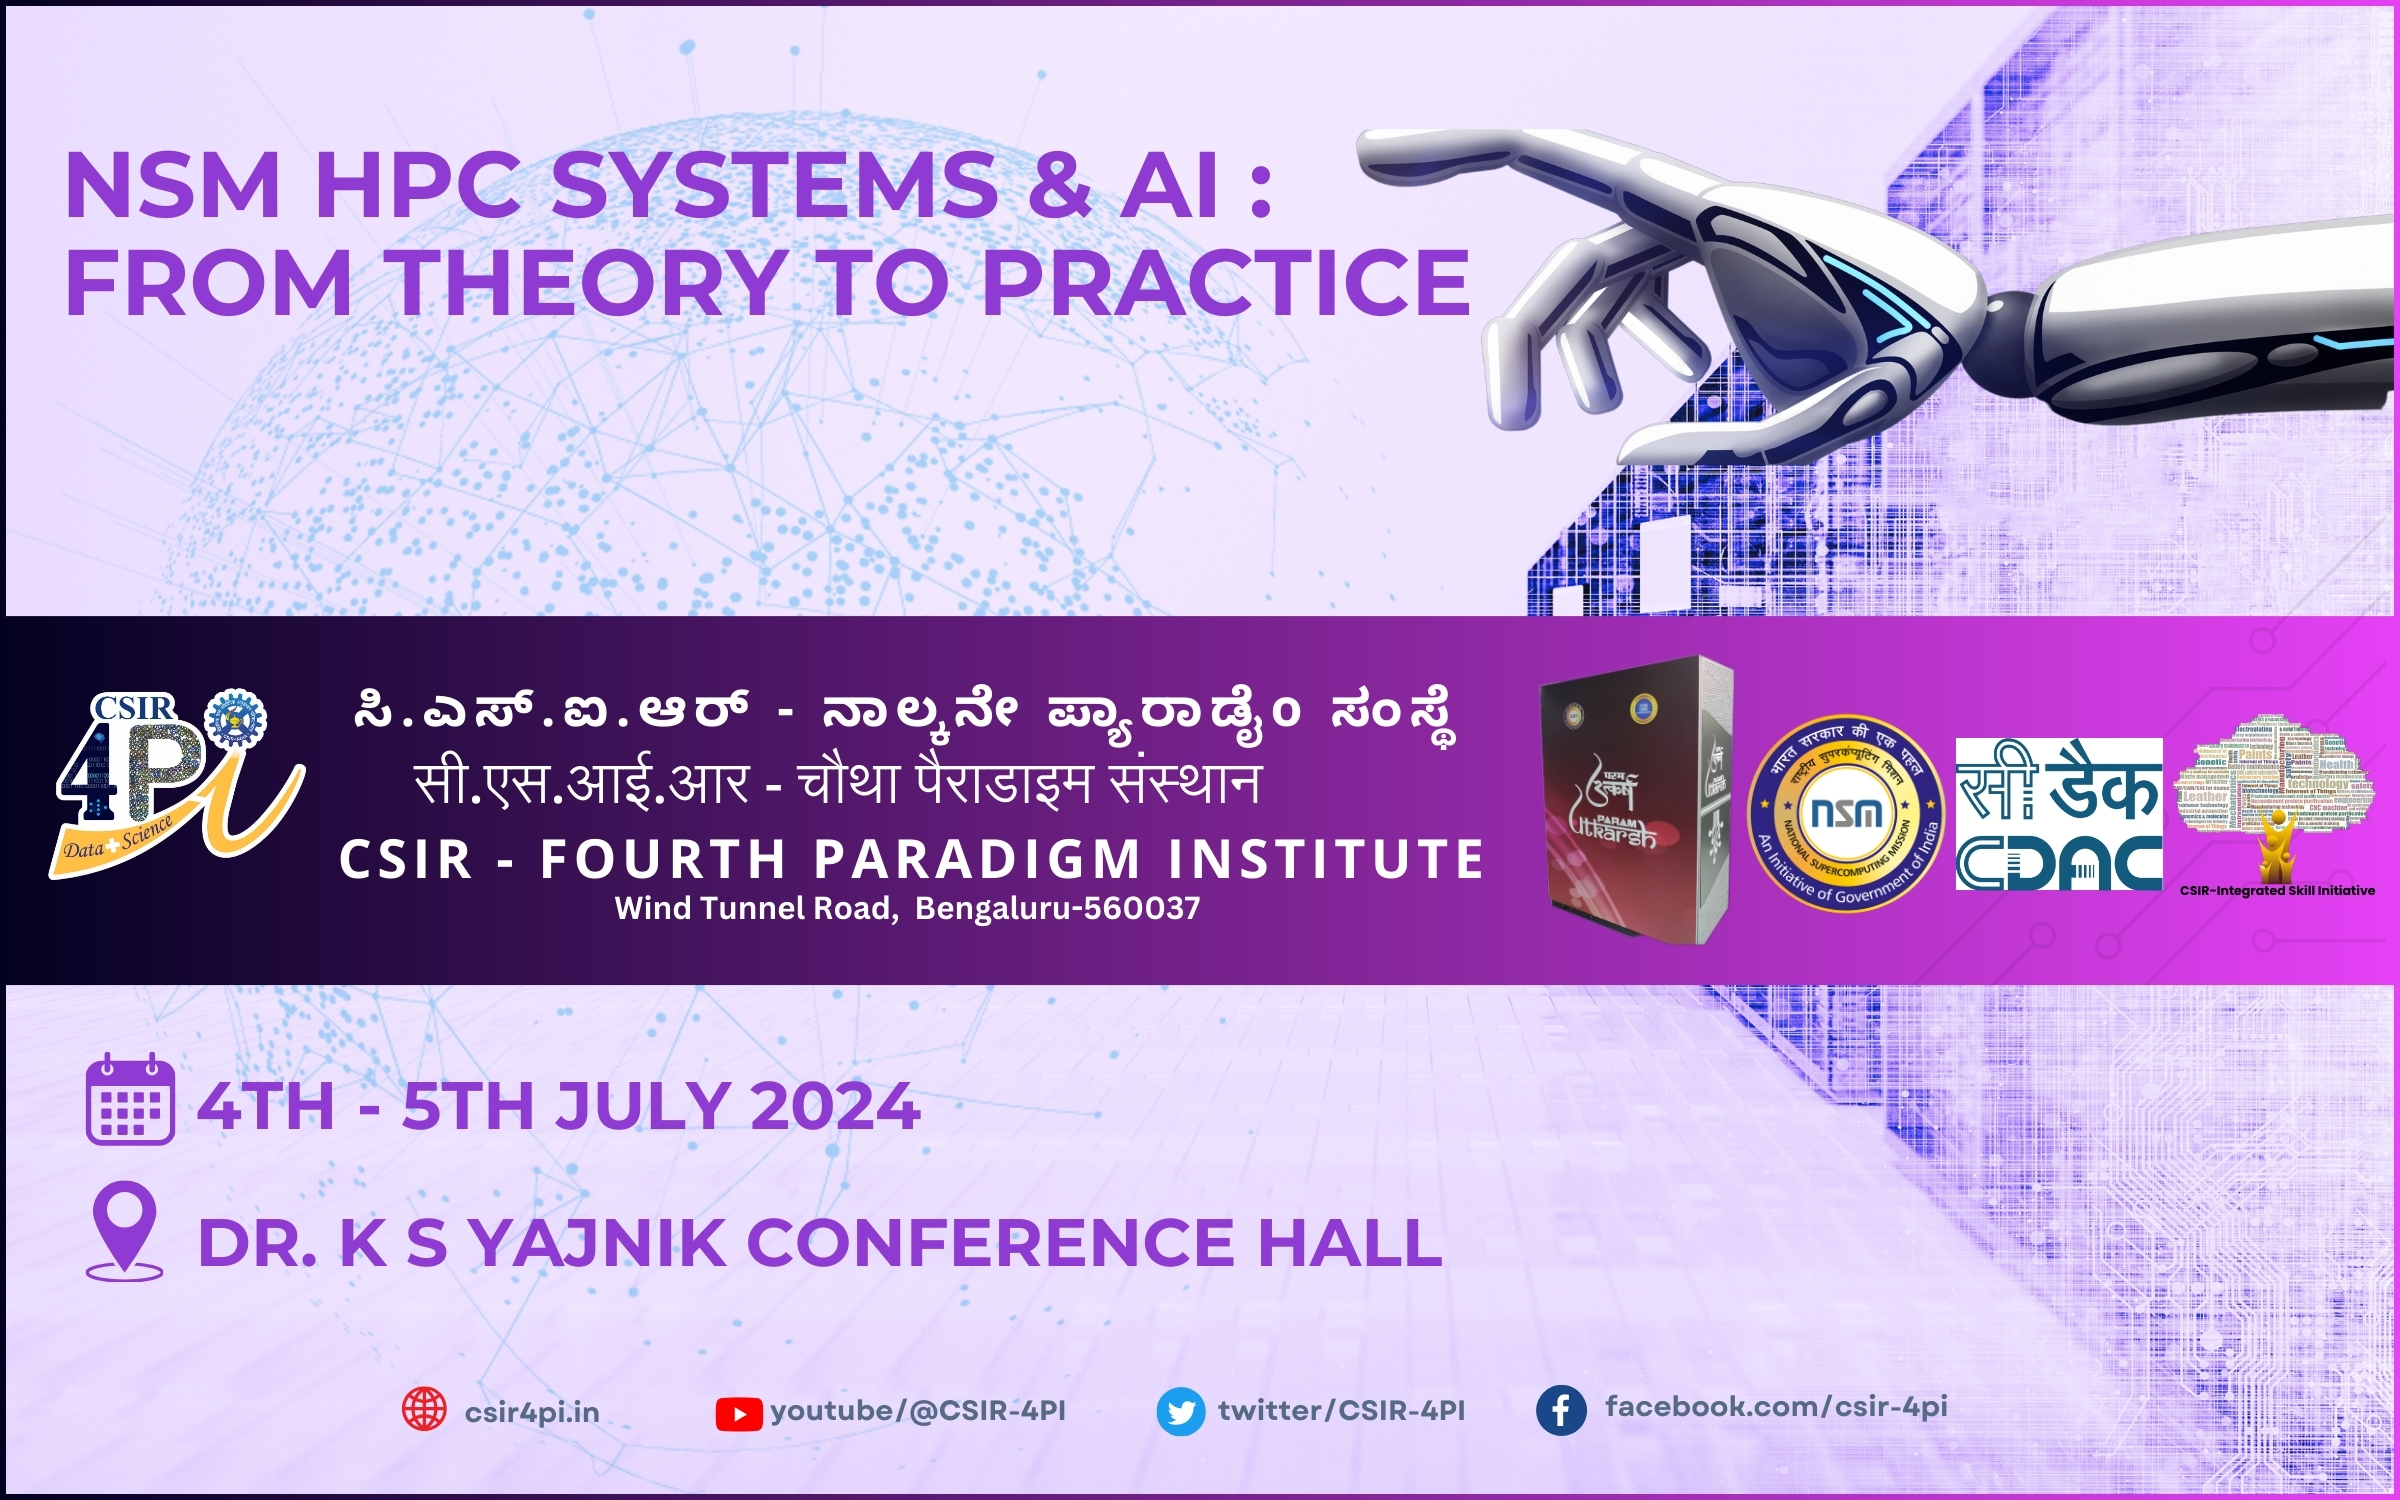 NSM HPC Systems & AI: From theory to practice